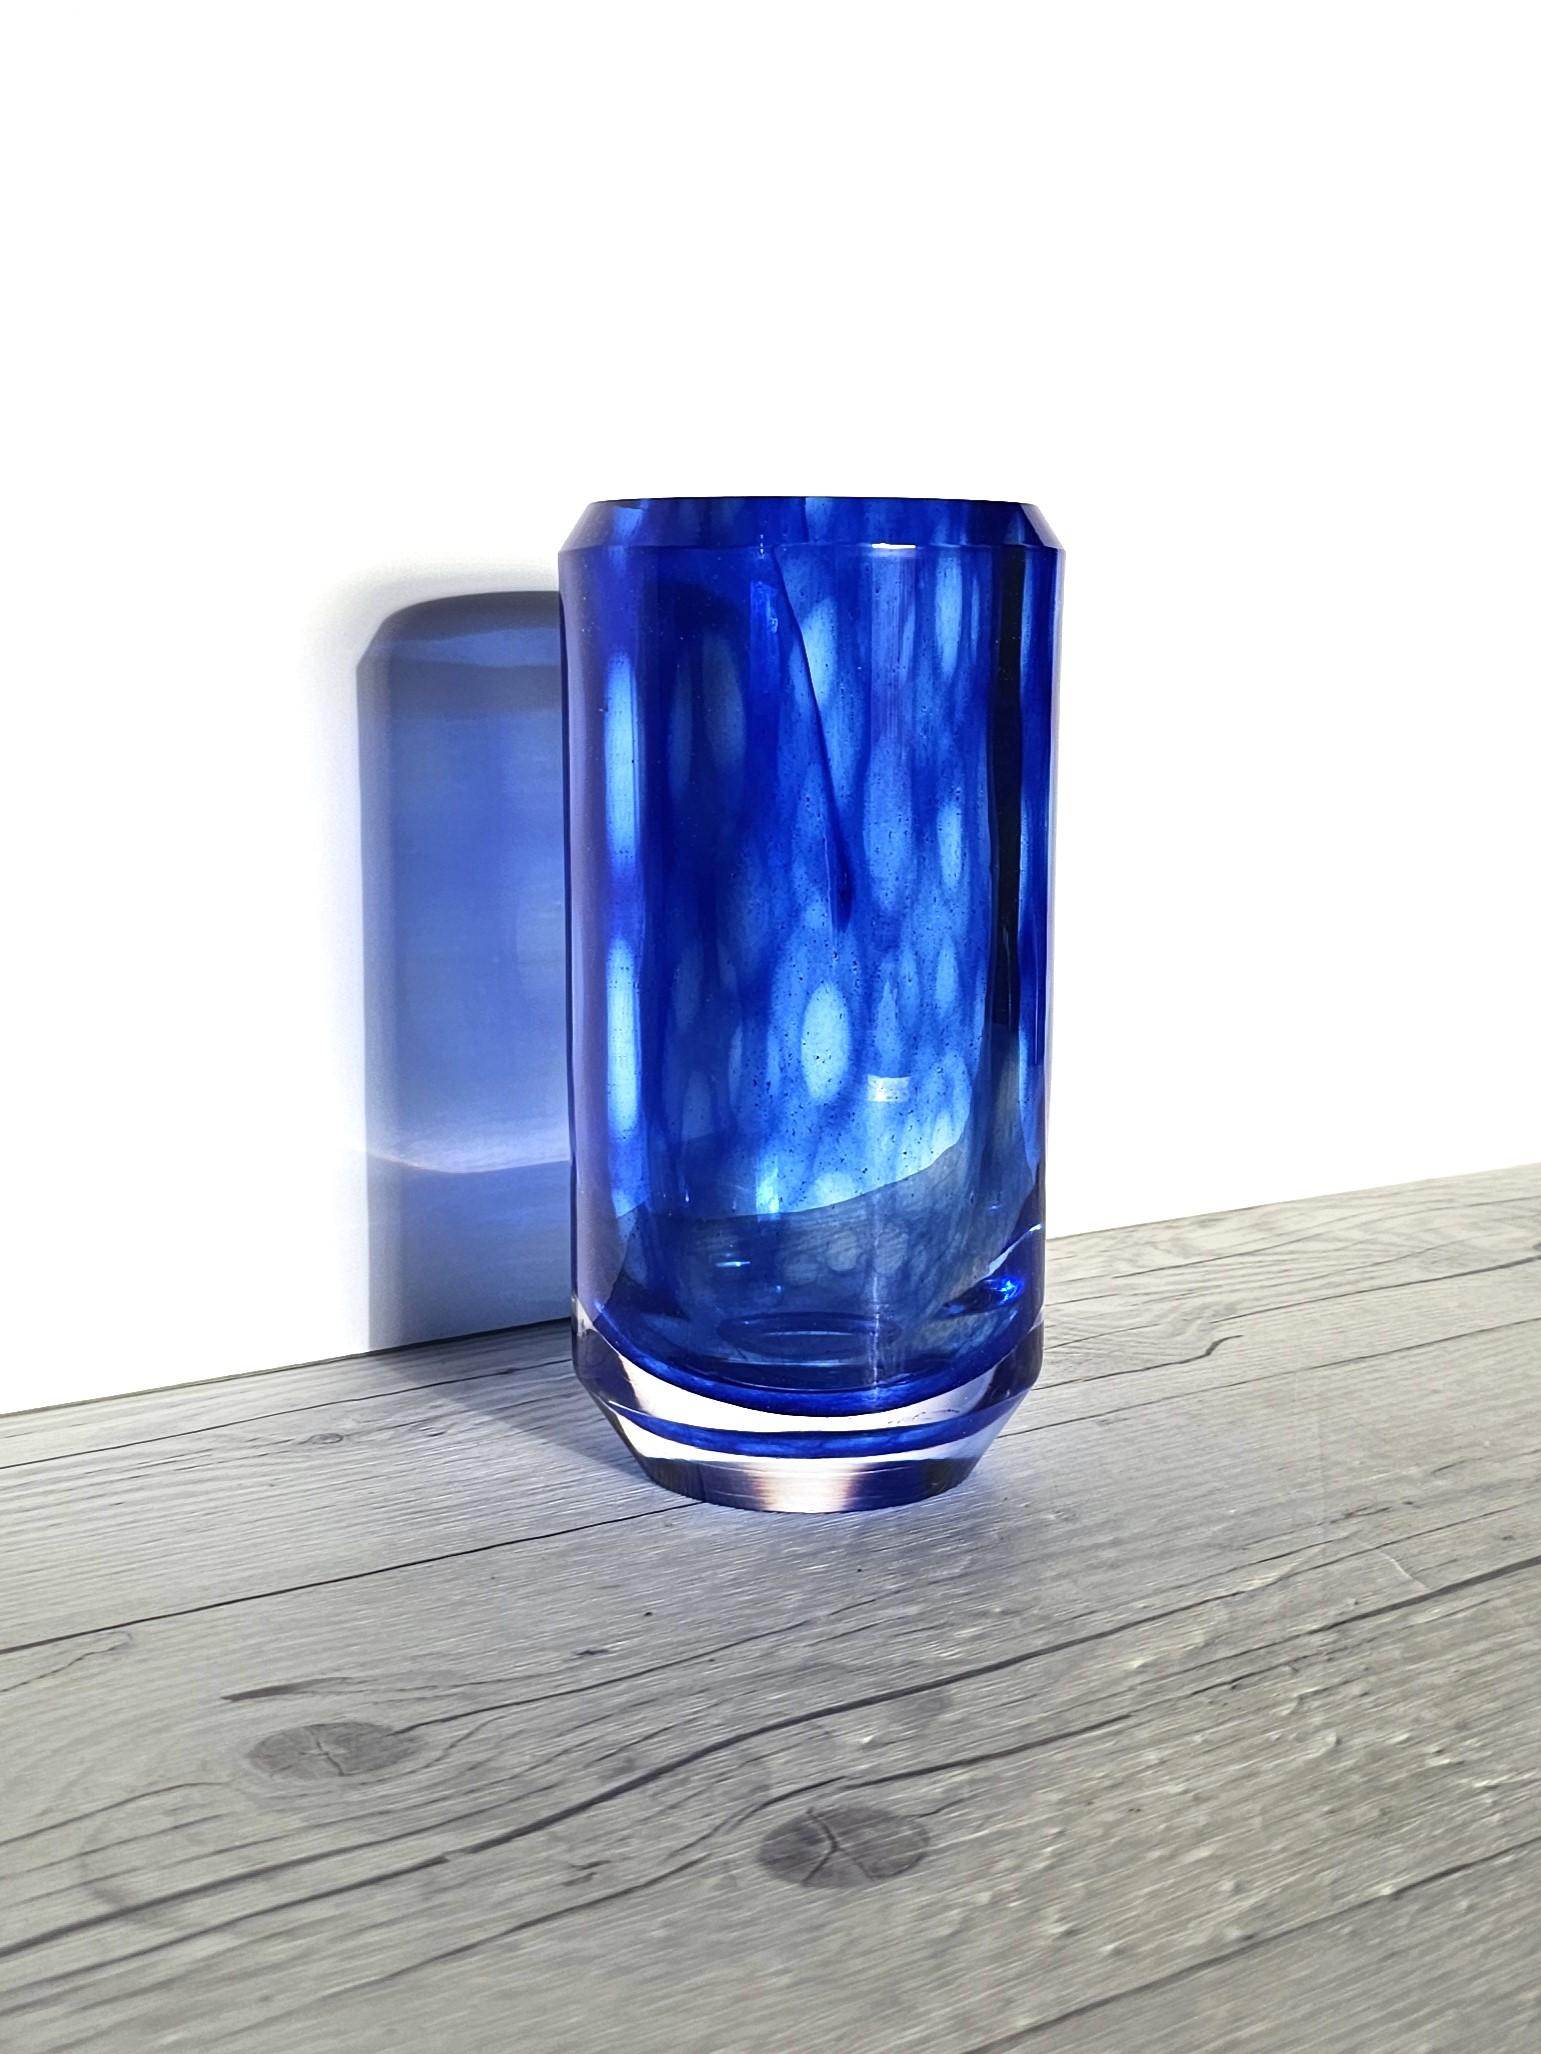 This sleek work of Scandinavian Modern art glass is by Vicke Lindstrand (b. 1904 - d. 1983). Lindstrand is considered one of the most influential 20th-century glass artists and a glass art pioneer. His prolific career held many design highlights,